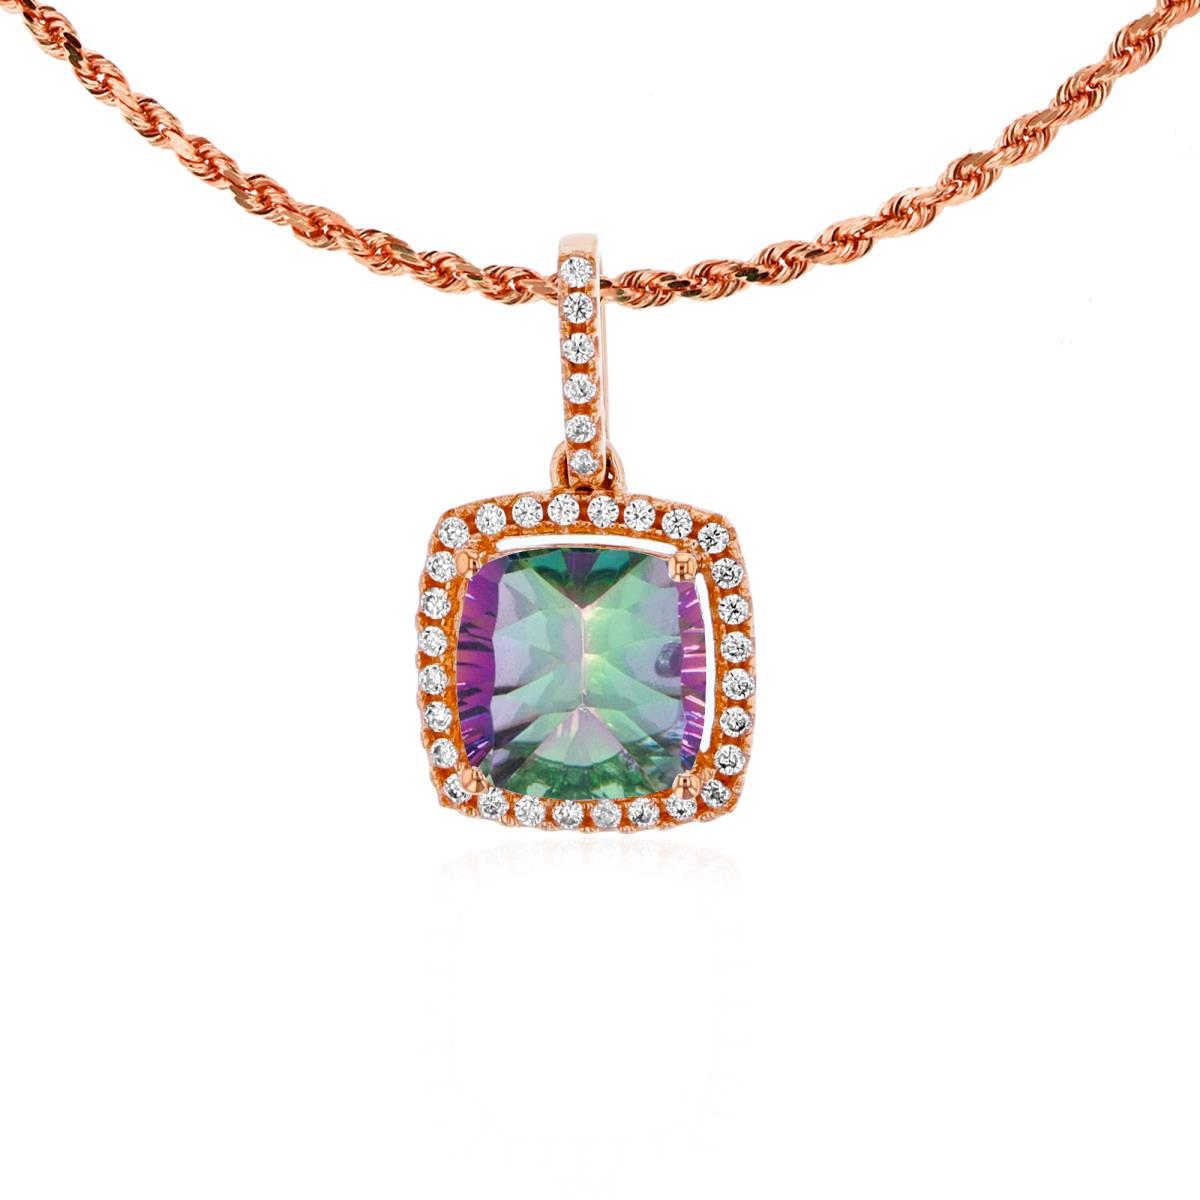 10K Rose Gold 7mm Cushion Mystic Green Topaz & 0.14 CTTW Rnd Diamond Halo 18" Rope Chain Necklace